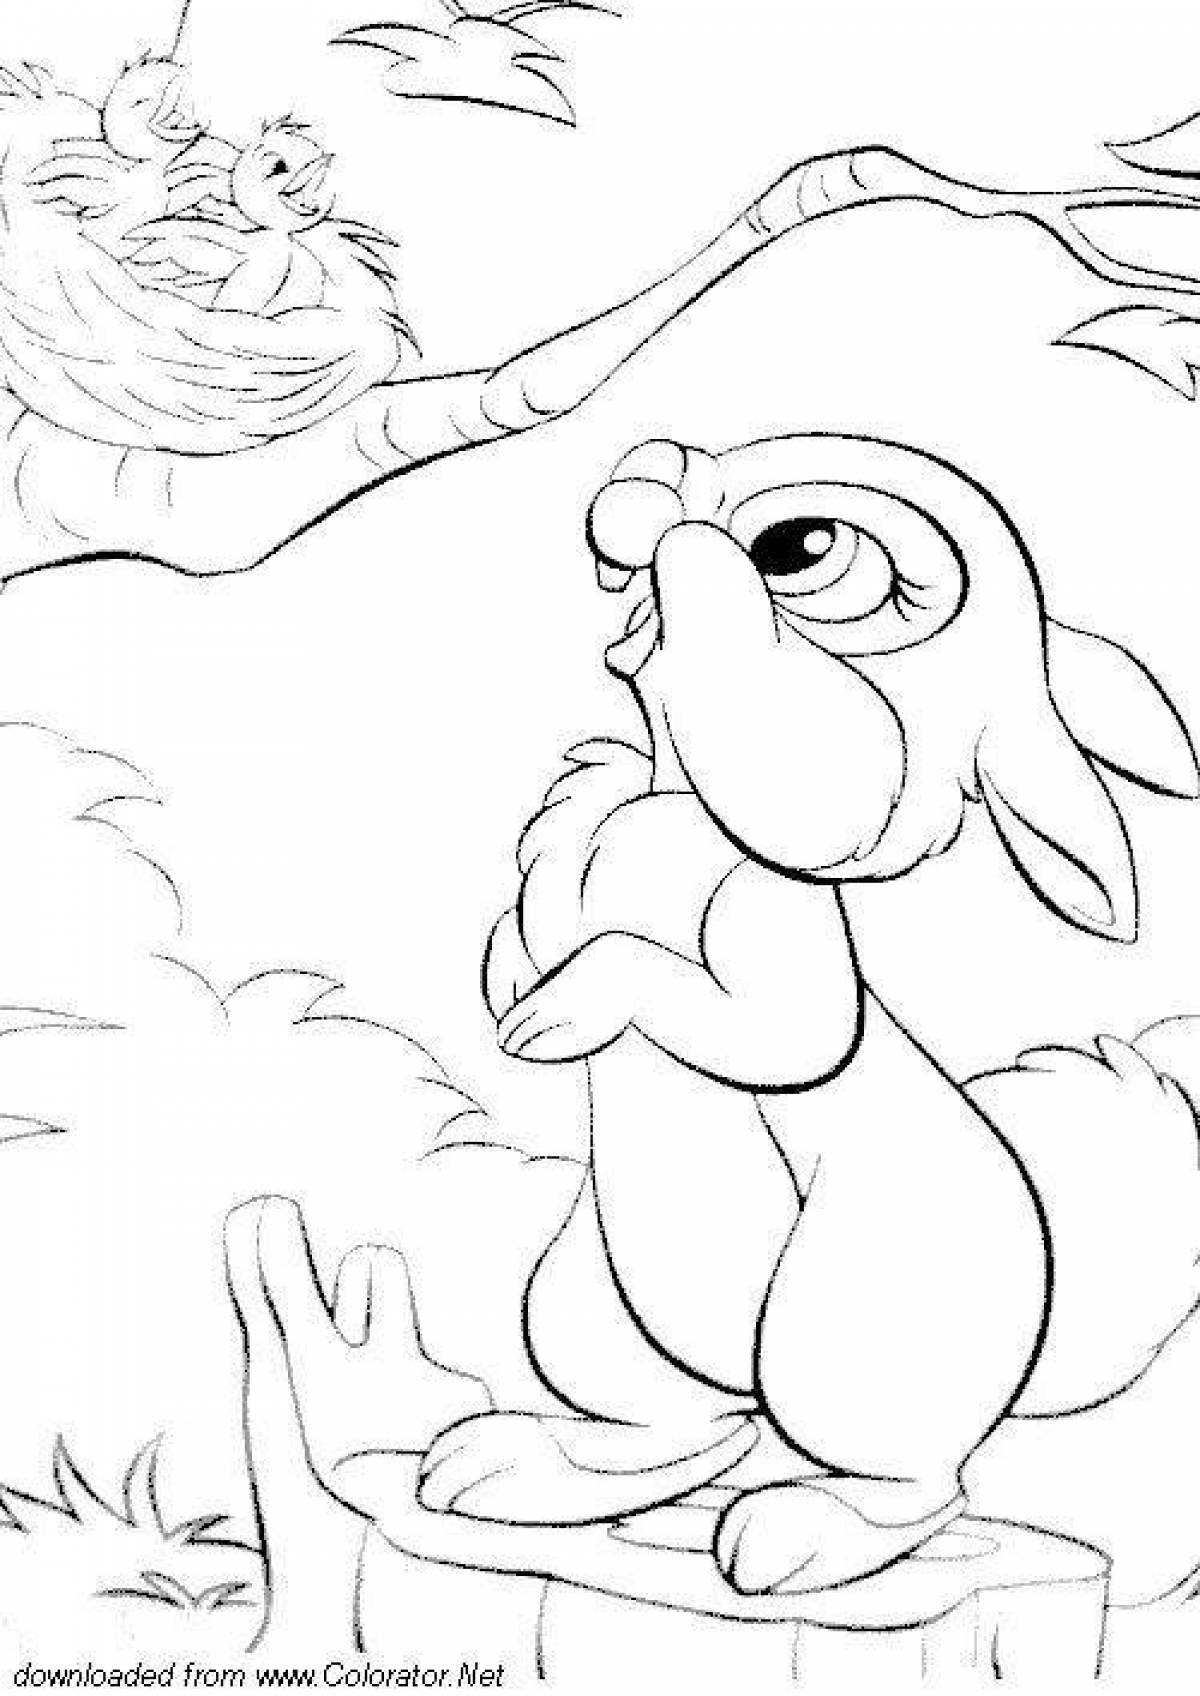 Charming hare coloring book